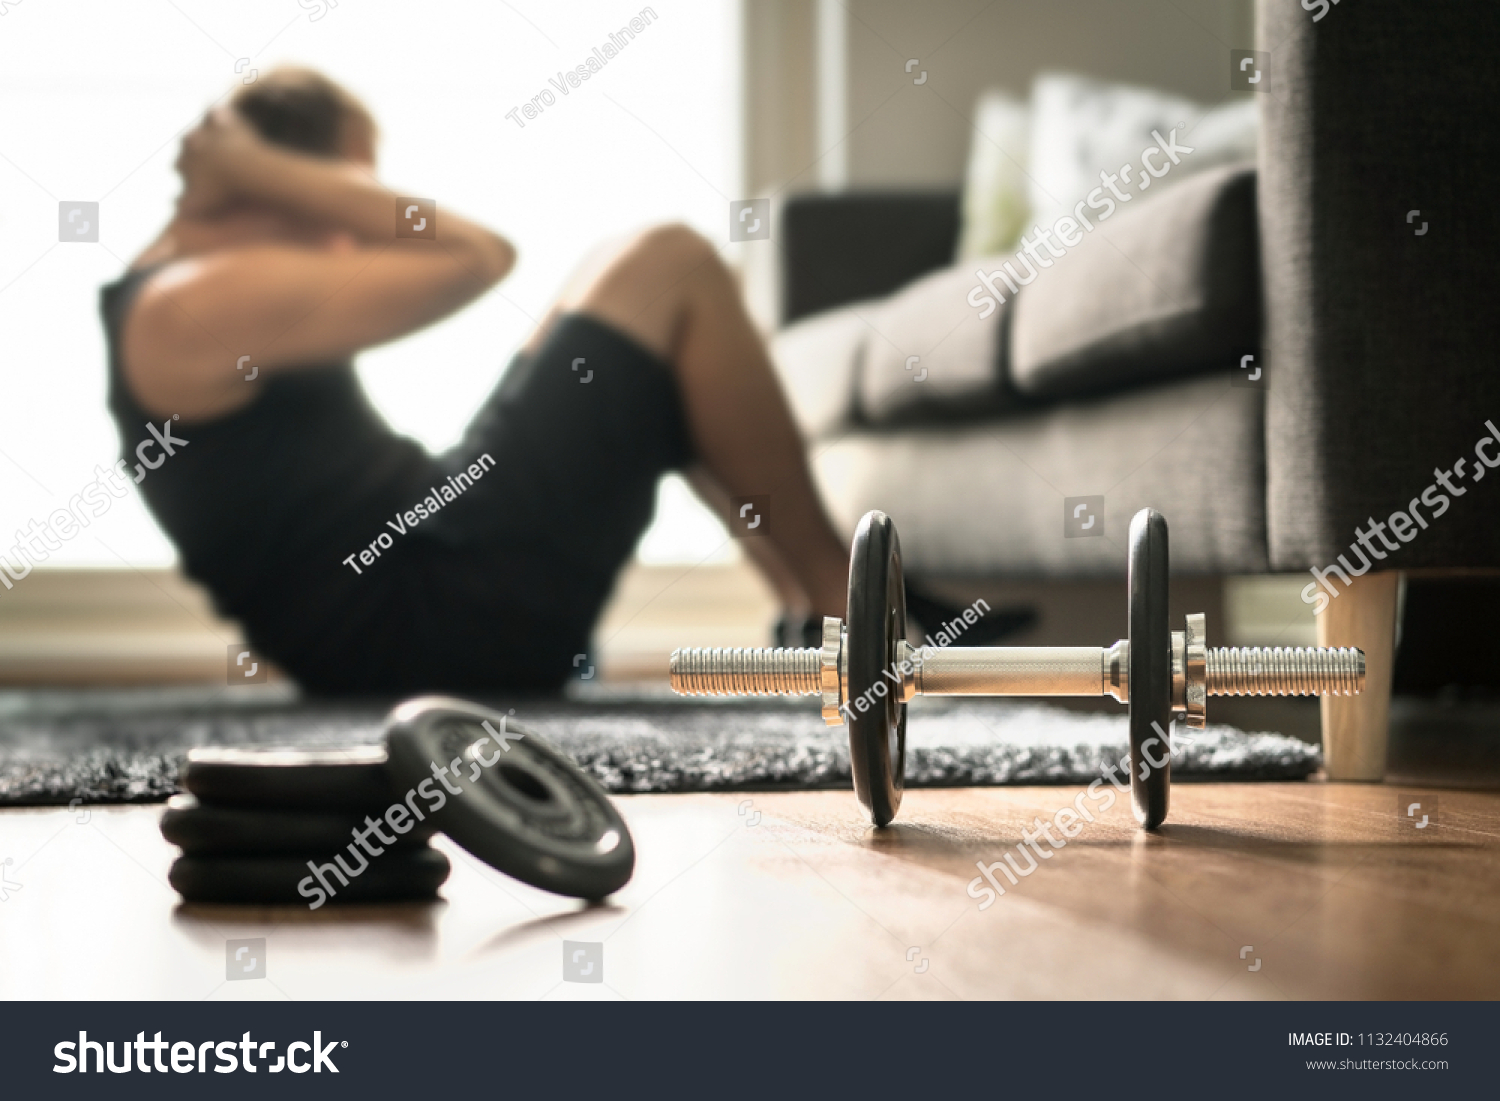 Home workout. Man doing ab training and crunches in living room gym. Guy doing sit ups. Warm up before weight exercise. Fitness concept with dumbbell and athlete. #1132404866